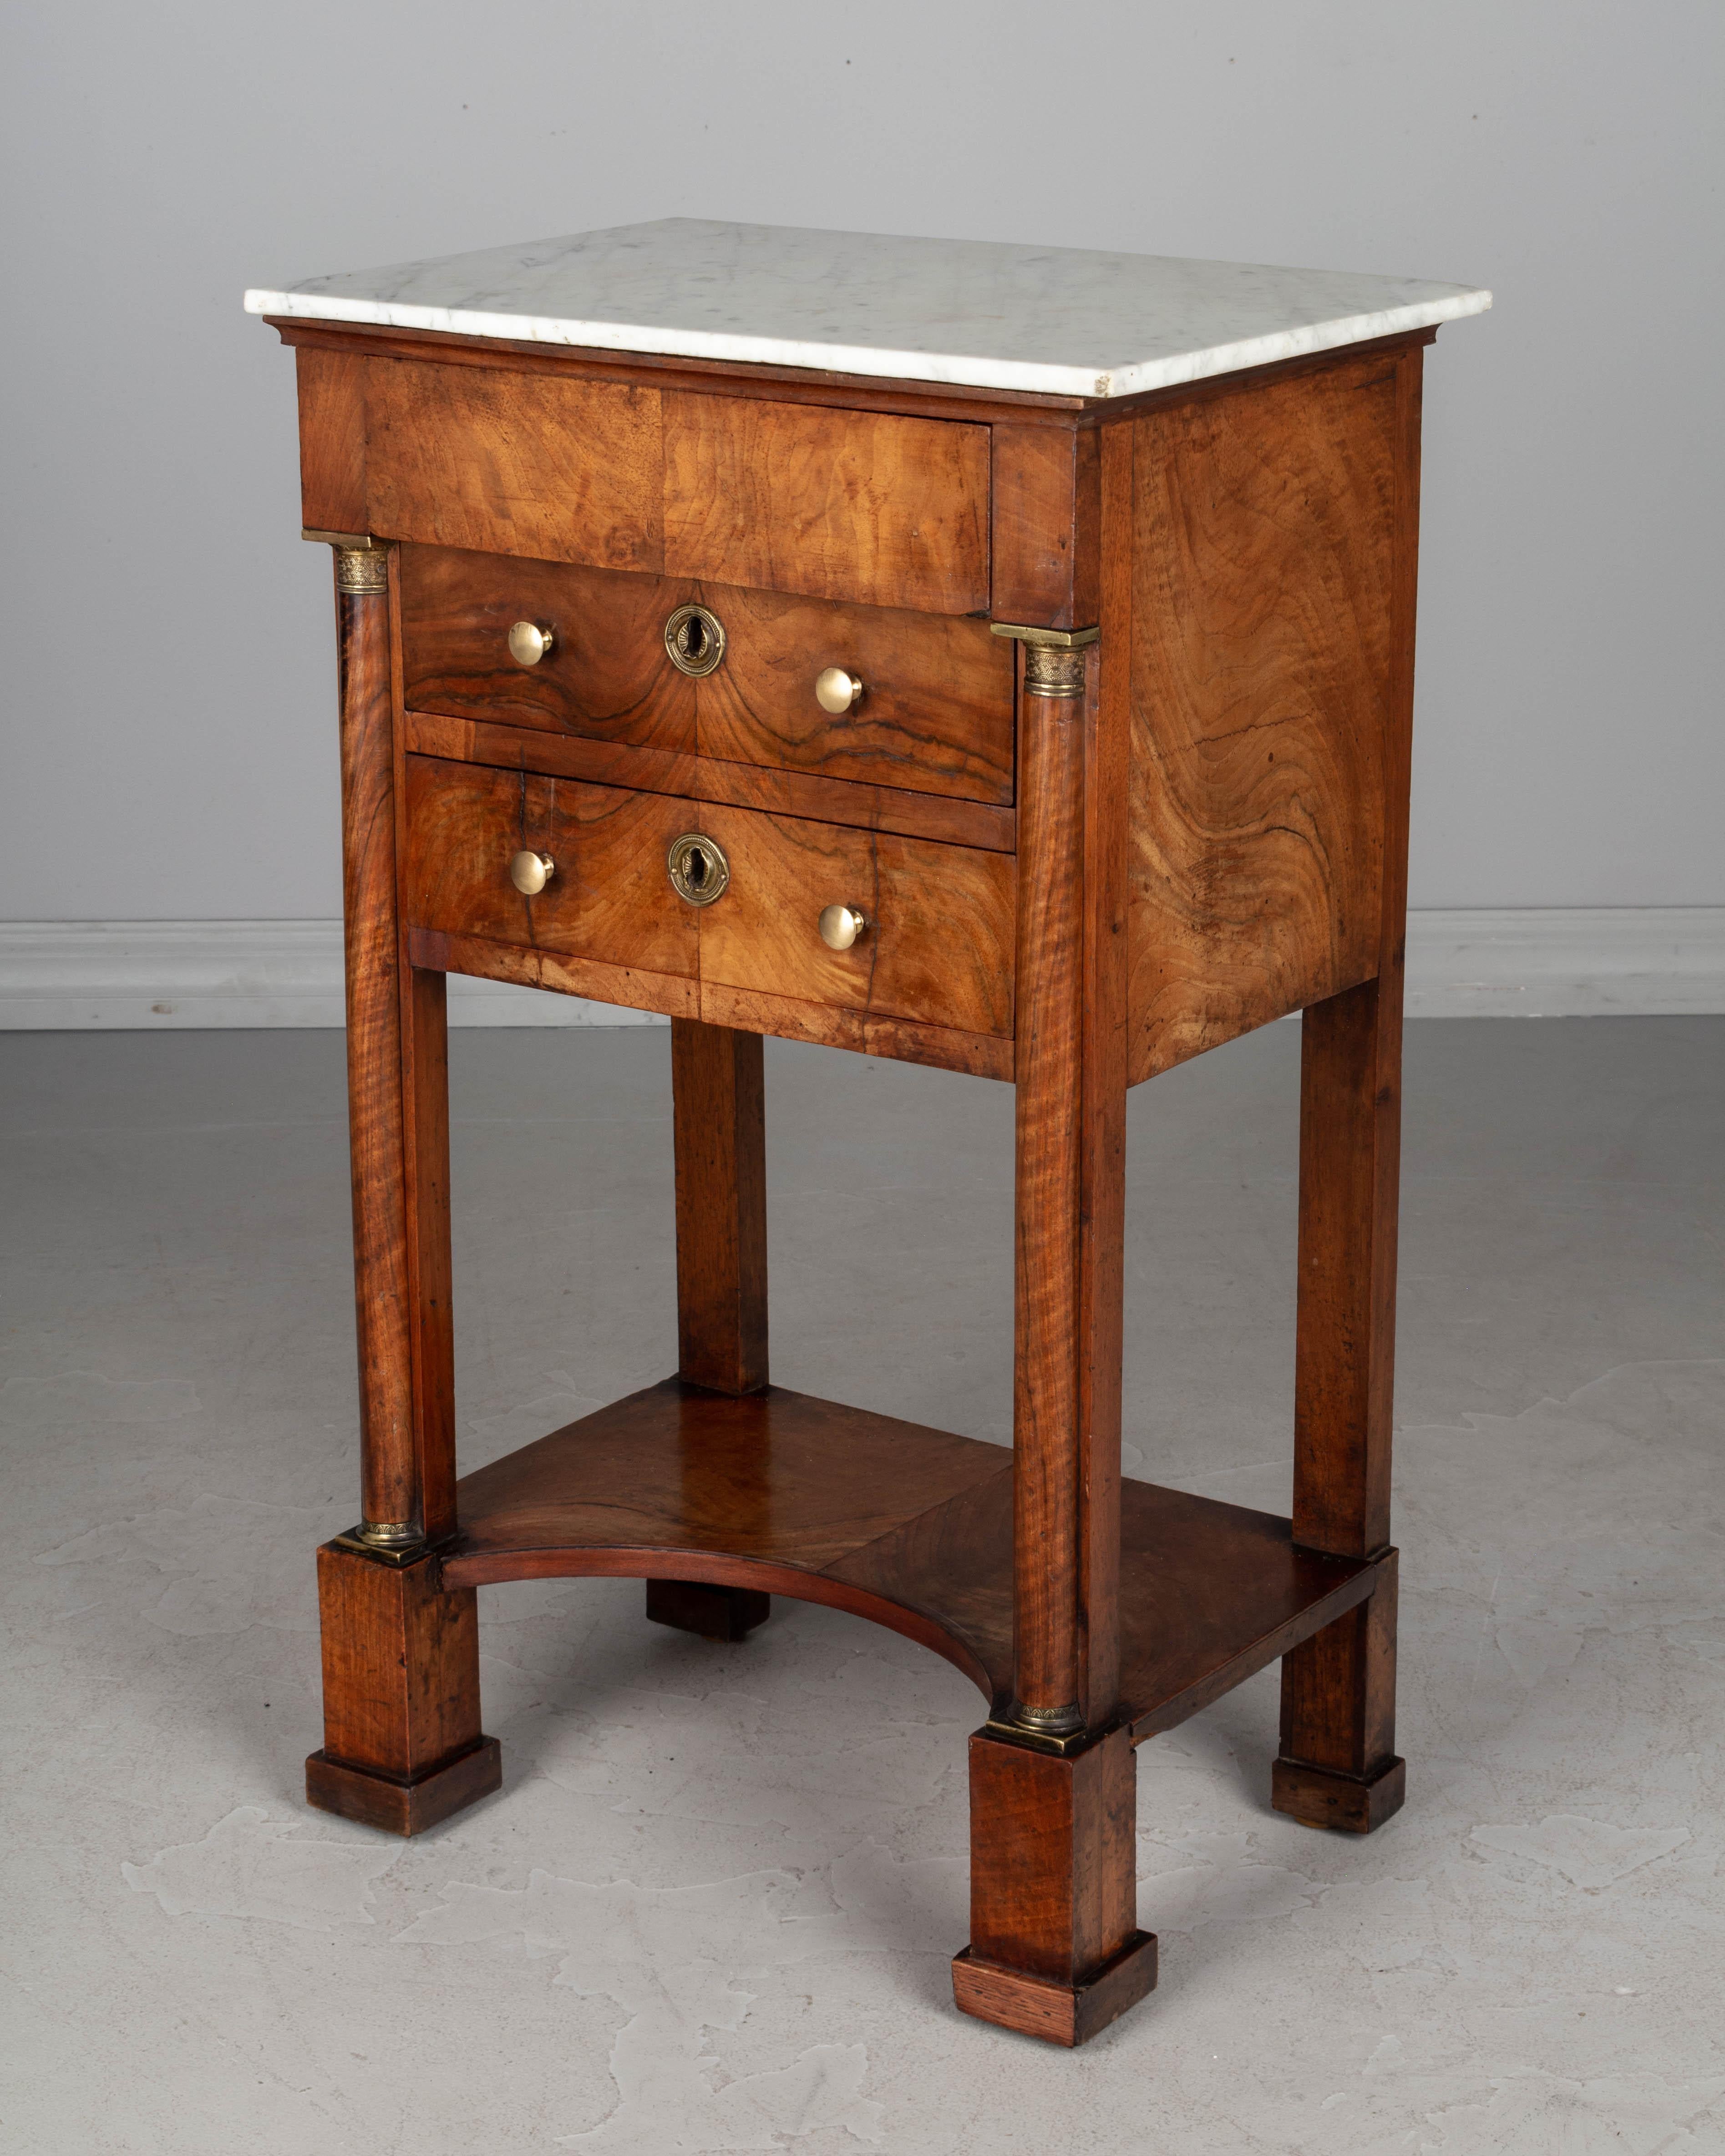 A fine 19th century French Empire period side table or nightstand made of solid walnut and veneer of walnut and finished on all four sides. Book matched veneers with beautiful swirling patterned wood grain. Two dovetailed drawers with original